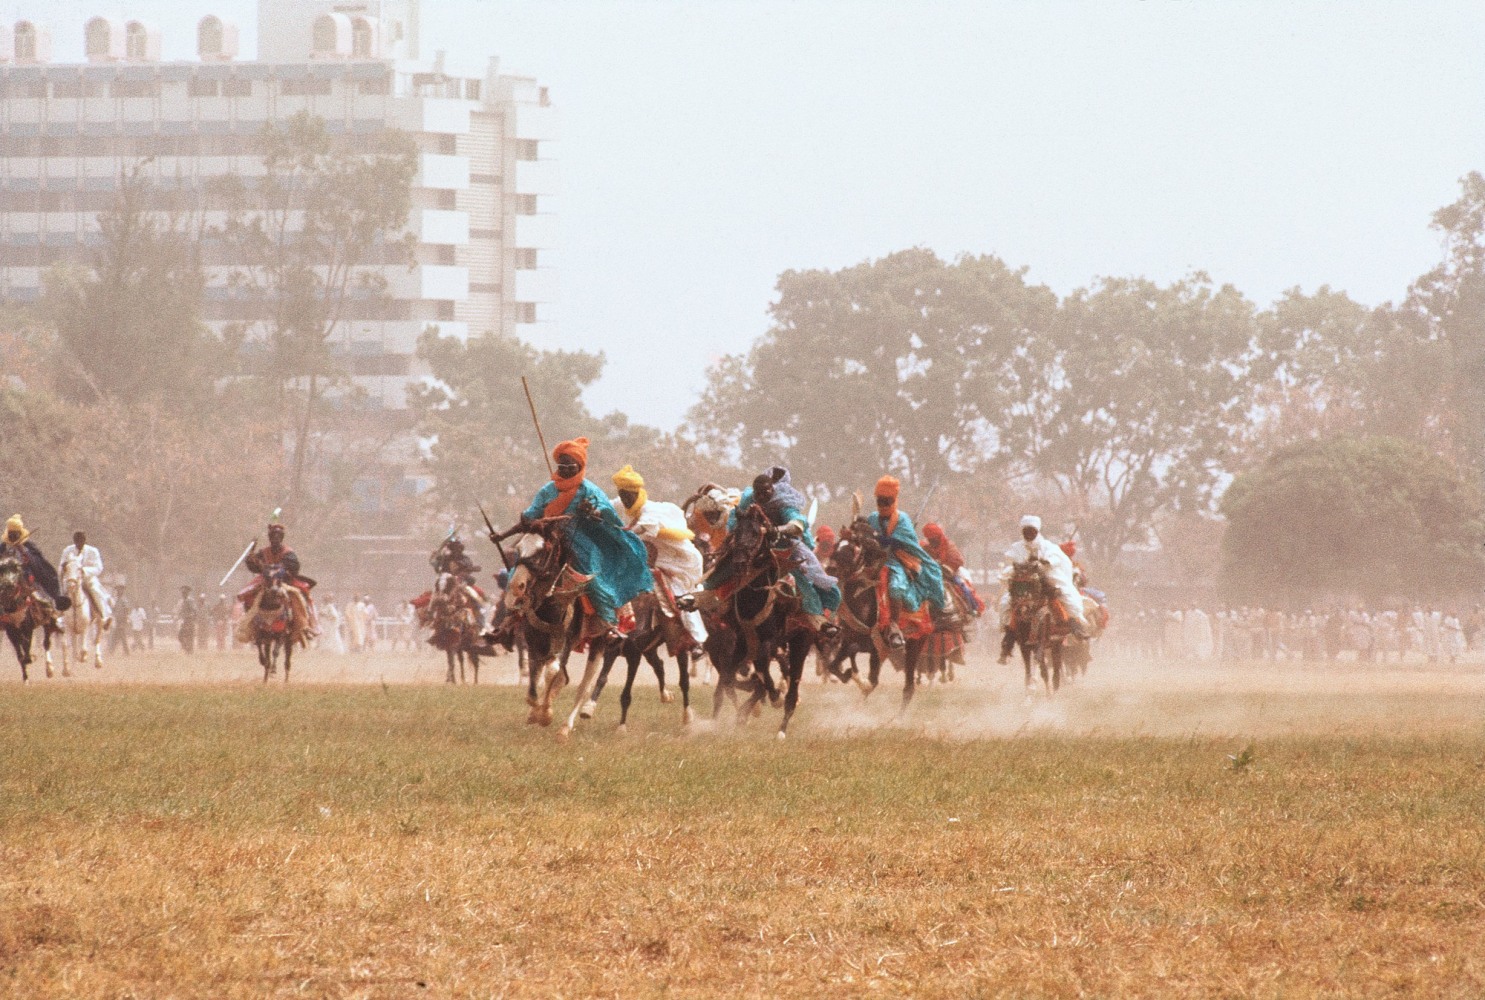 Roy Lewis (b. 1937)
Durbar Horsemen Charge the Stands, 1977
Archival inkjet print on Simply Elegant Gold Fibre paper
Image: 13 3/4 x 20 inches (34.9 x 50.8 cm) Sheet: 17 x 22 inches (43.2 x 55.9 cm)
Framed: 18 5/8 &amp;times; 25 3/8 &amp;times; 1 1/2 inches (47.3 &amp;times; 64.5 &amp;times; 3.8 cm)
Edition of 5, printed 2023